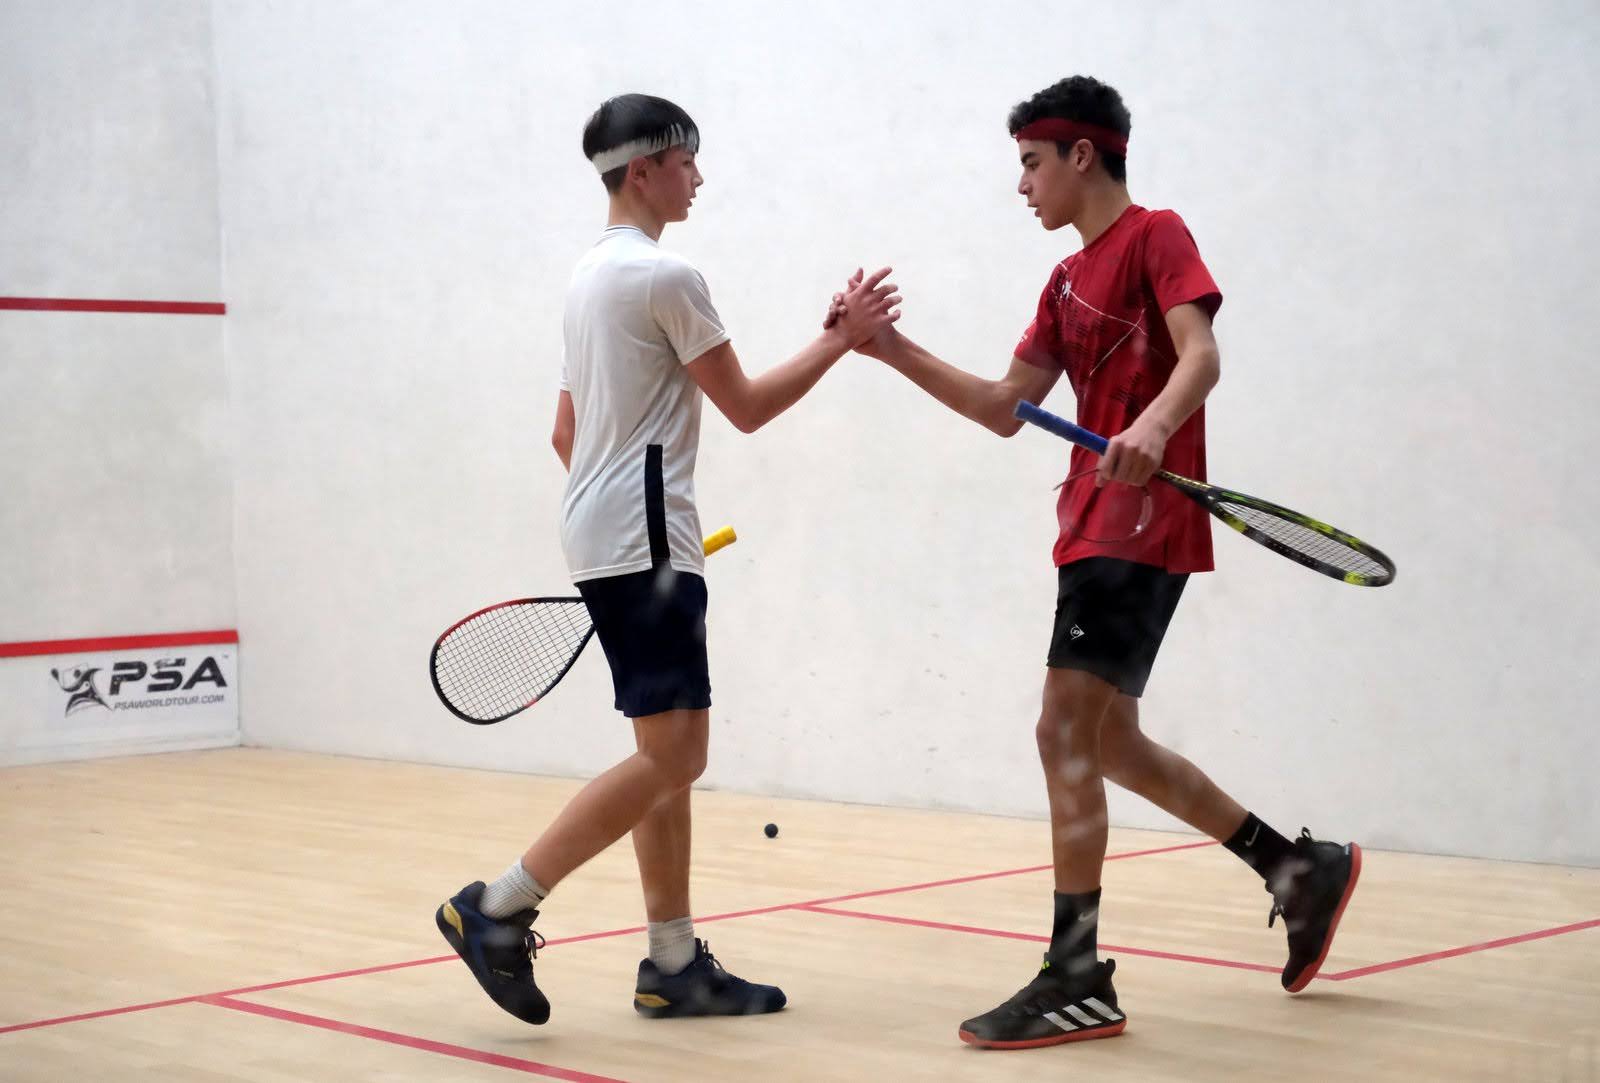 Two Boys Shaking Hands After A Squash Match